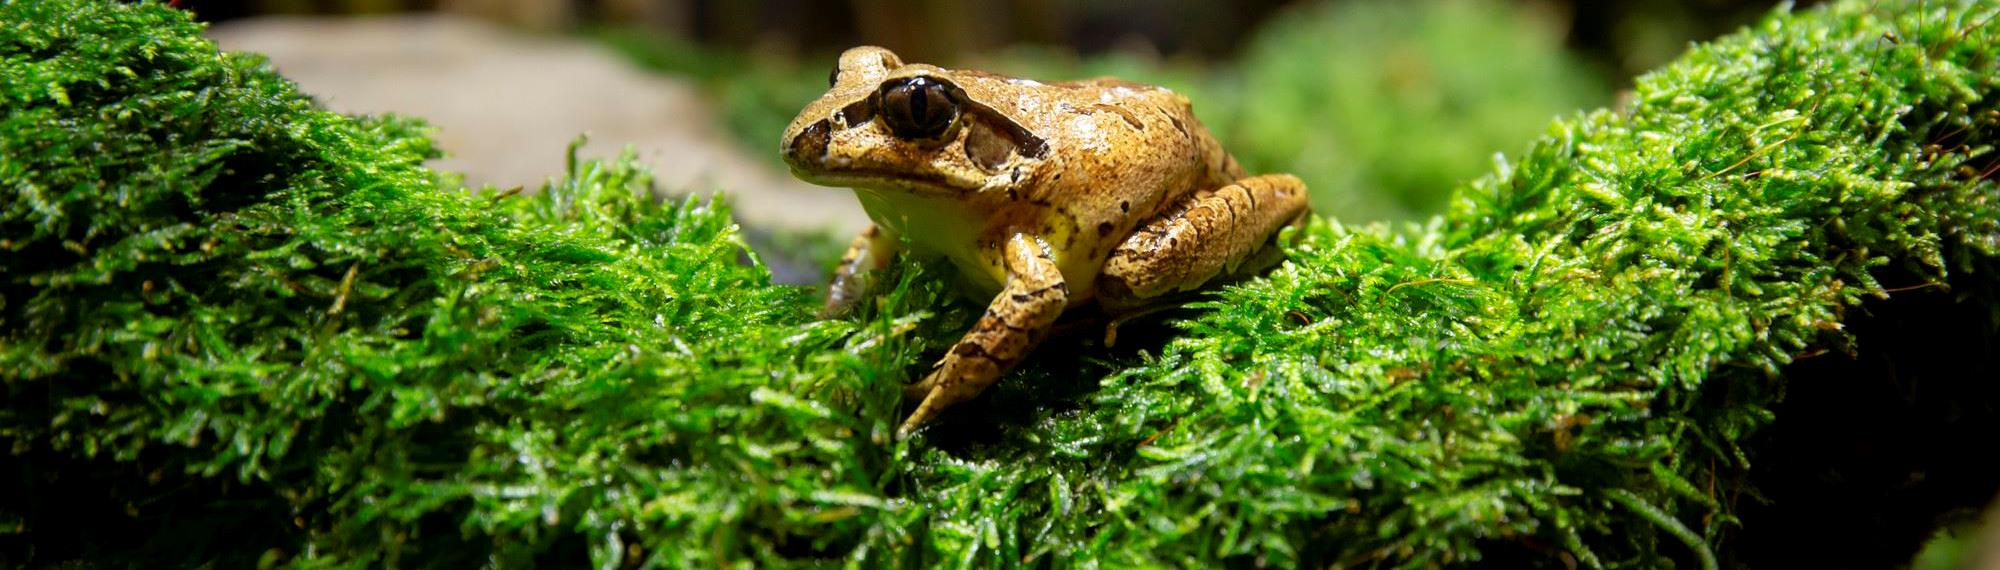 Stuttering Frog sitting on green moss. Frog is a golden olive-green with a black stripe through its eye.